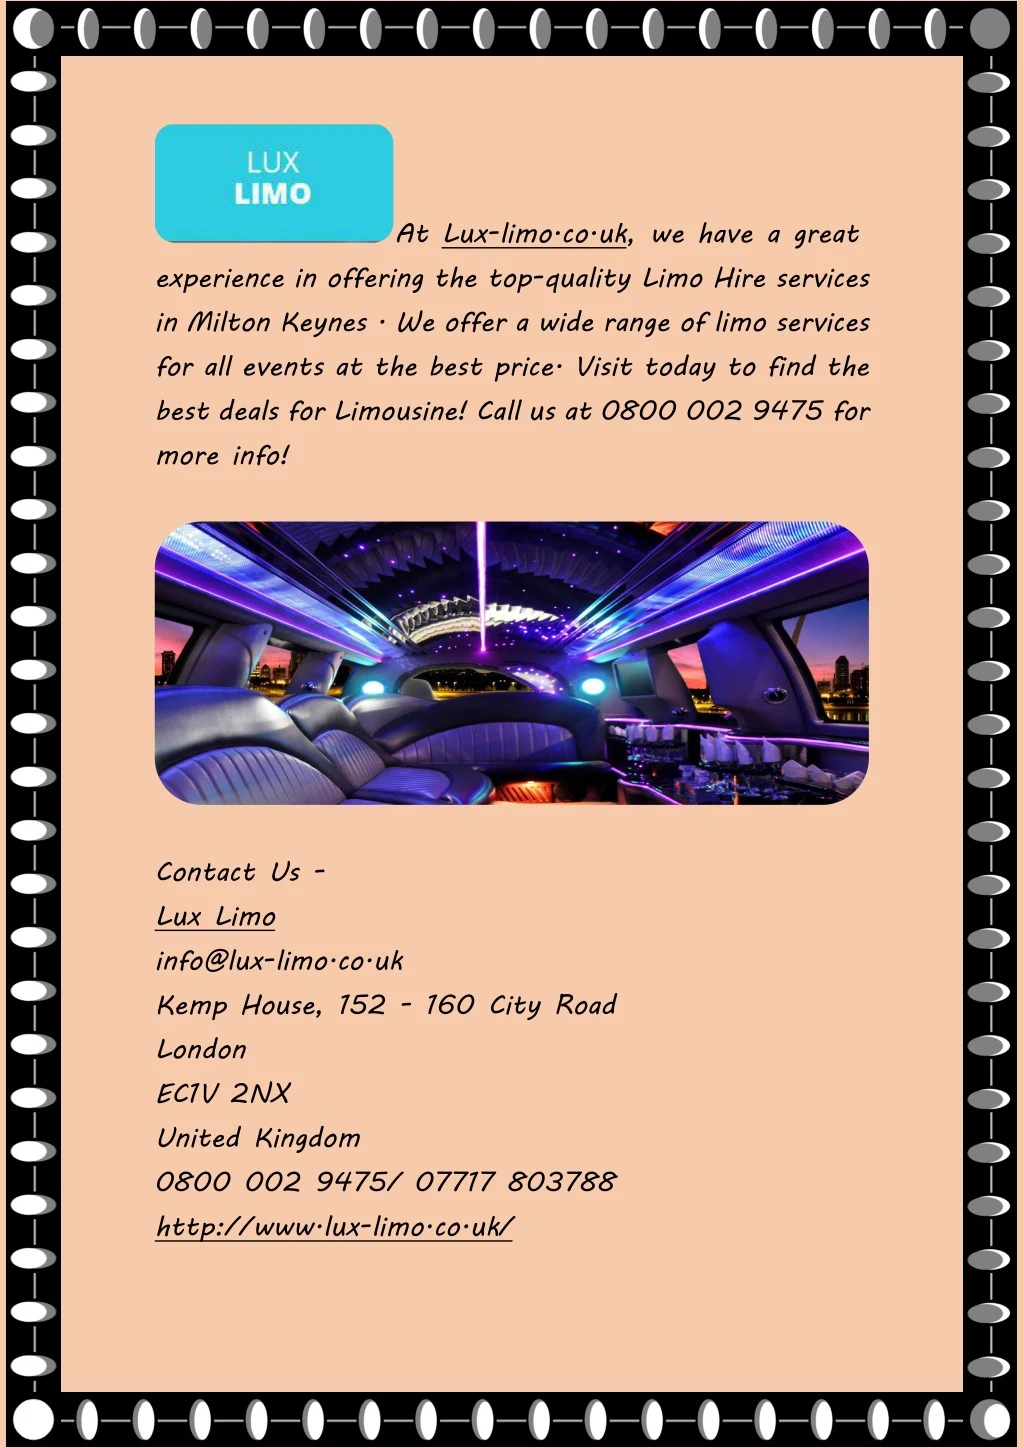 at lux limo co uk we have a great